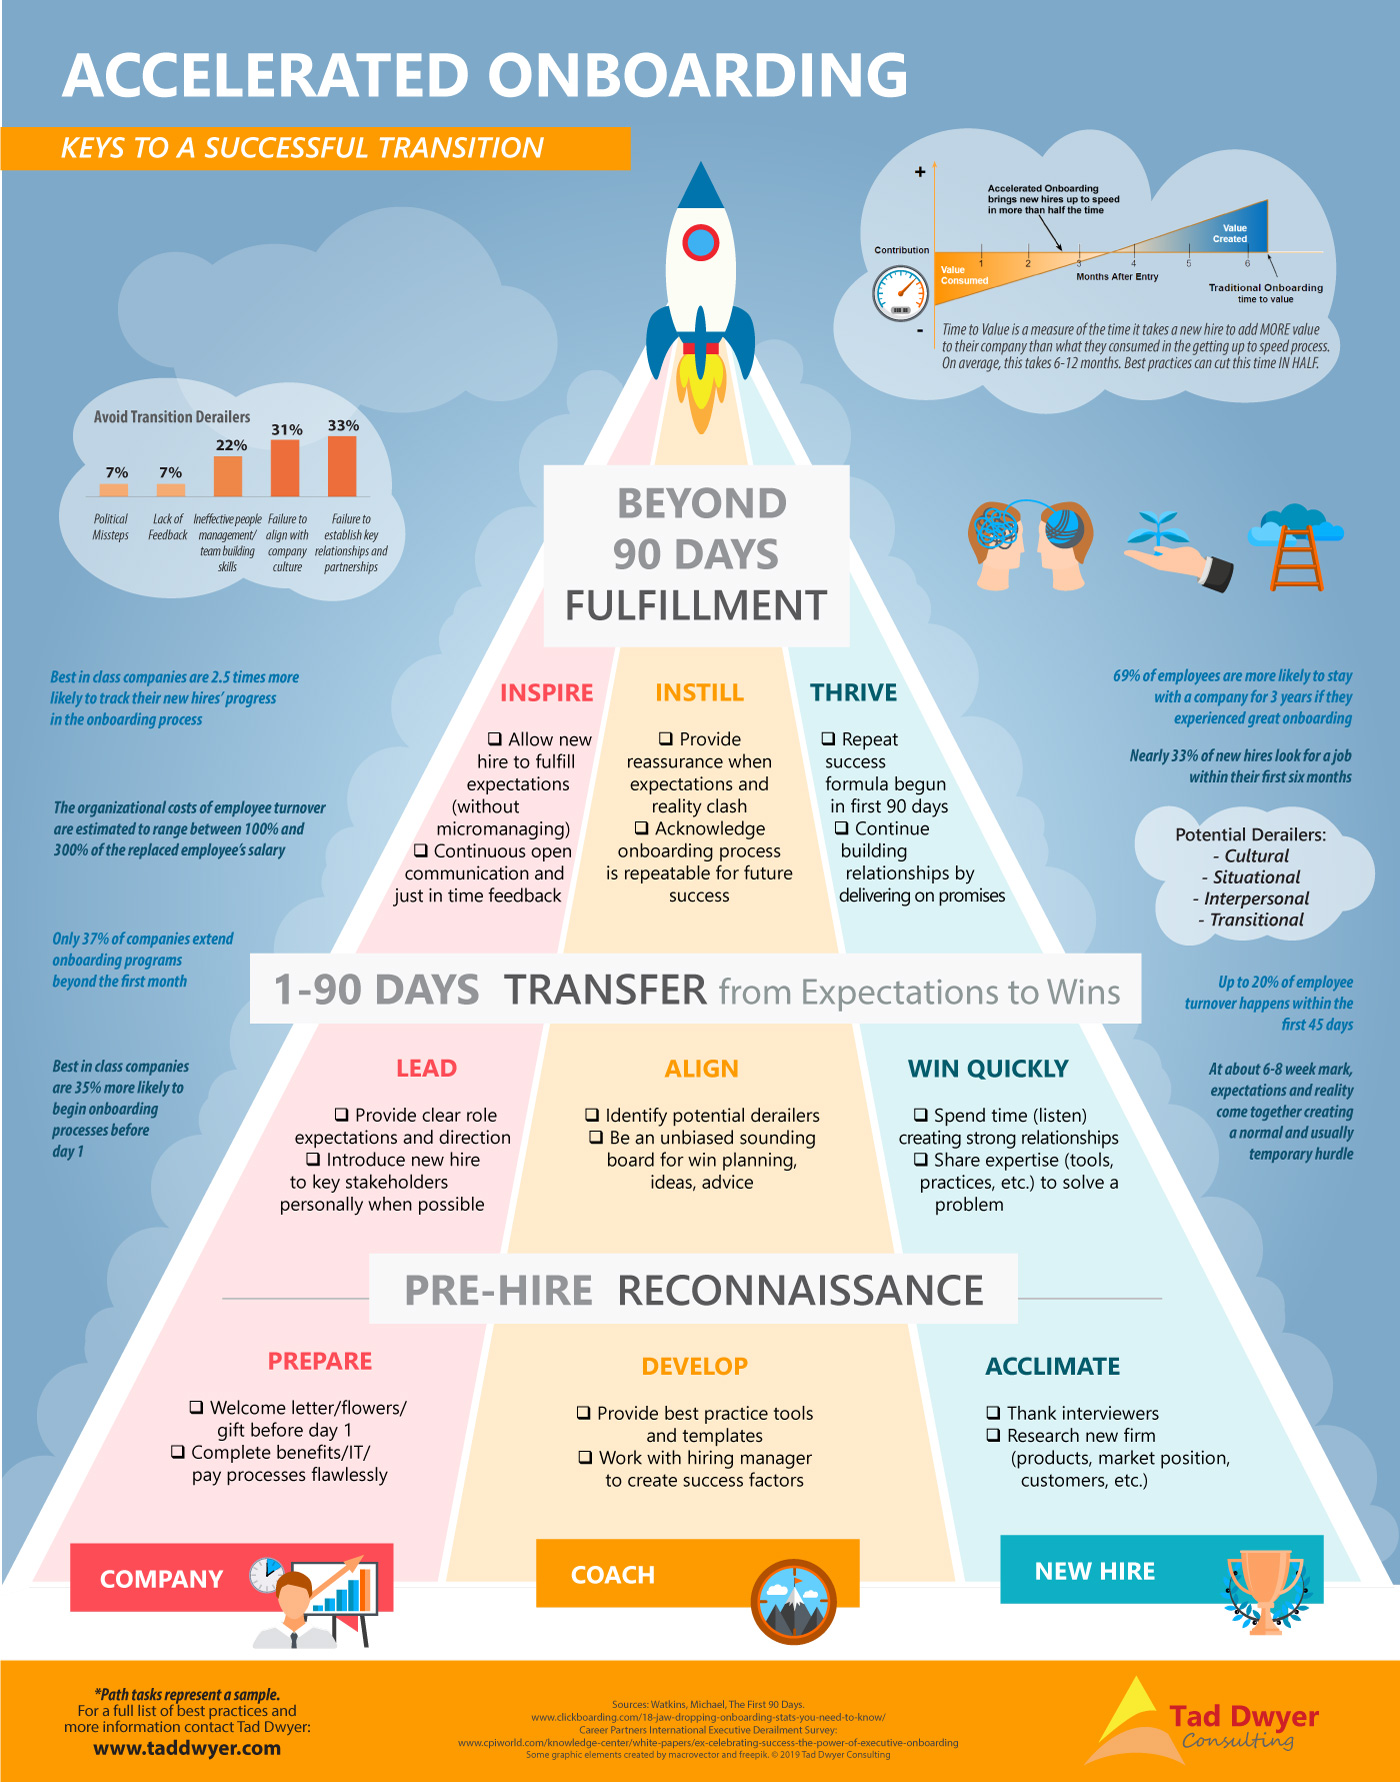 Accelerated Onboarding infographic